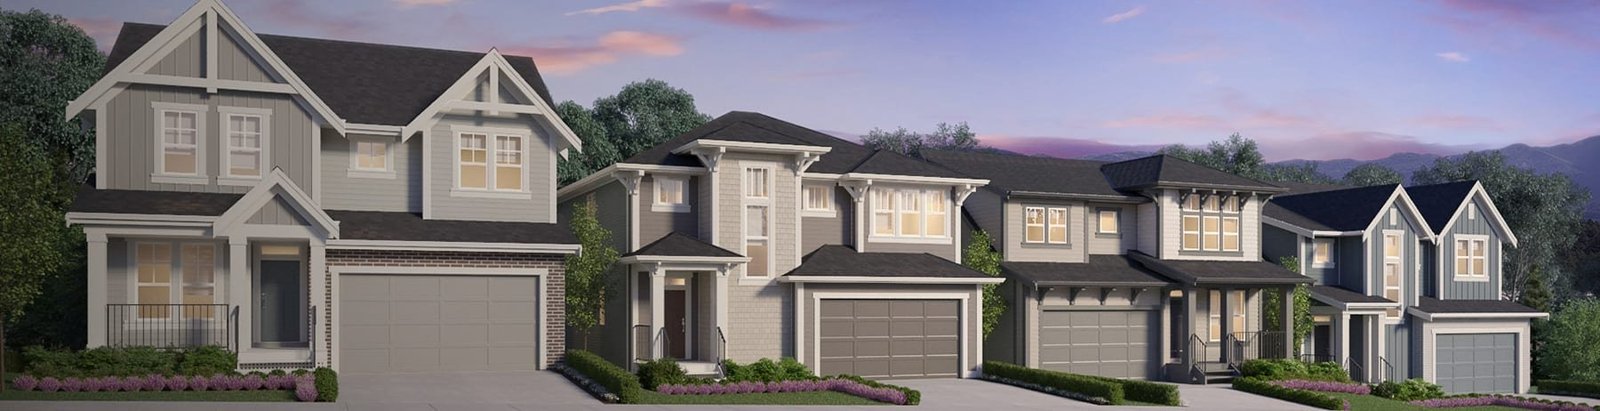 The Avery at Latimer Heights by Vesta Properties – Prices, Availability, Plans